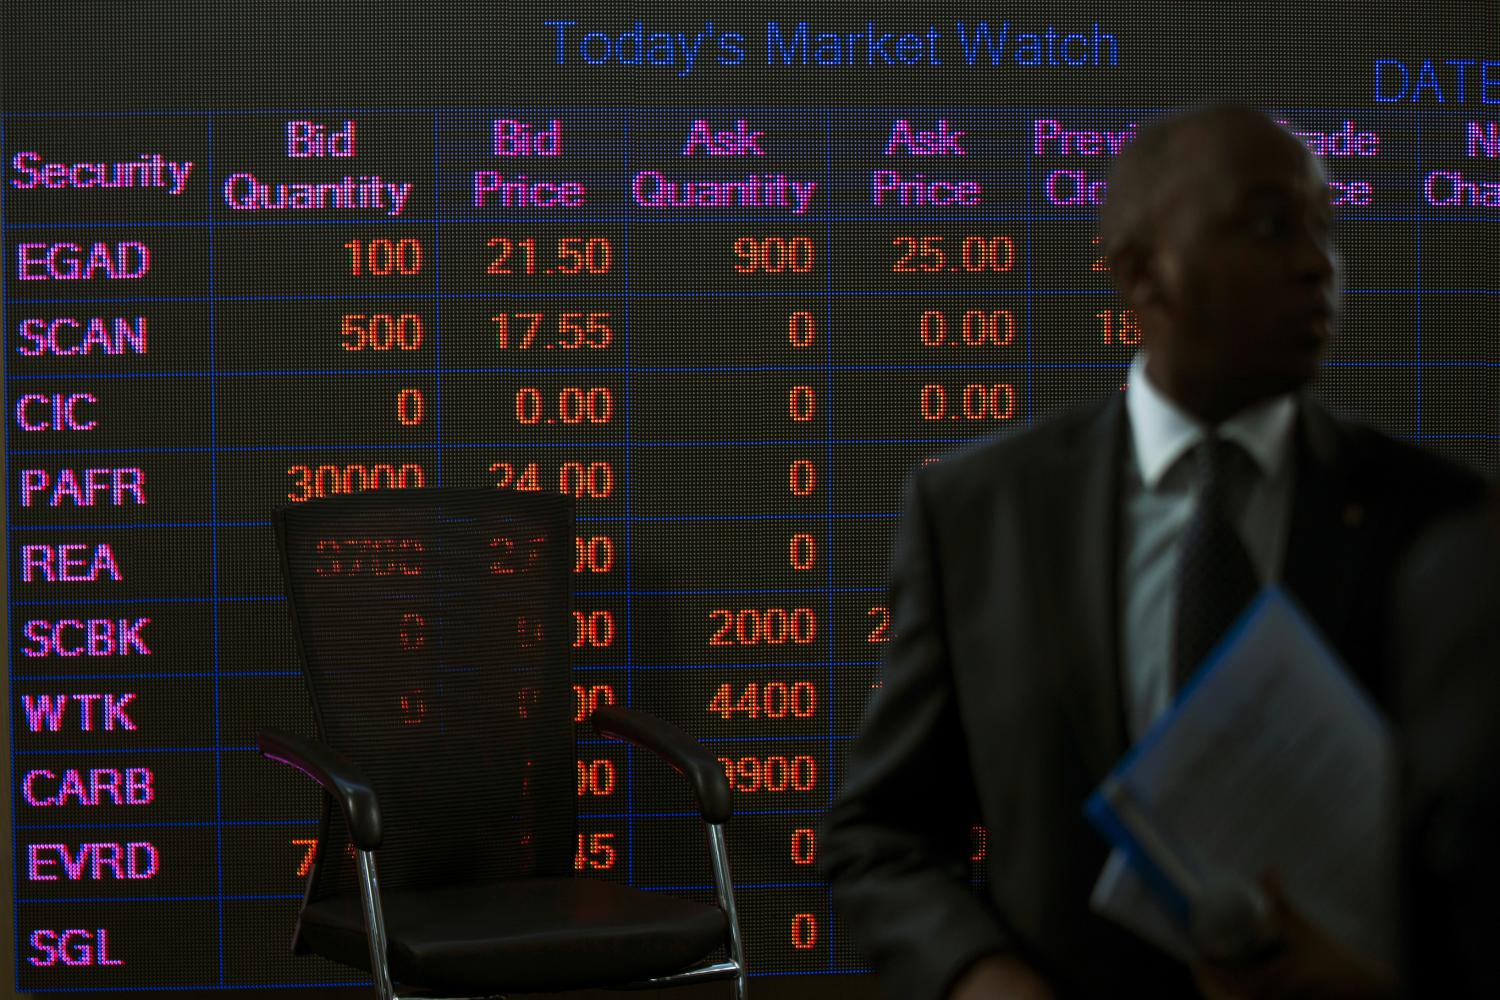 A man stands in front of an electronic board displaying market data at the Nairobi Securities Exchange in Nairobi, Kenya April 11, 2017. REUTERS/Baz Ratner - RC164D4FAF40